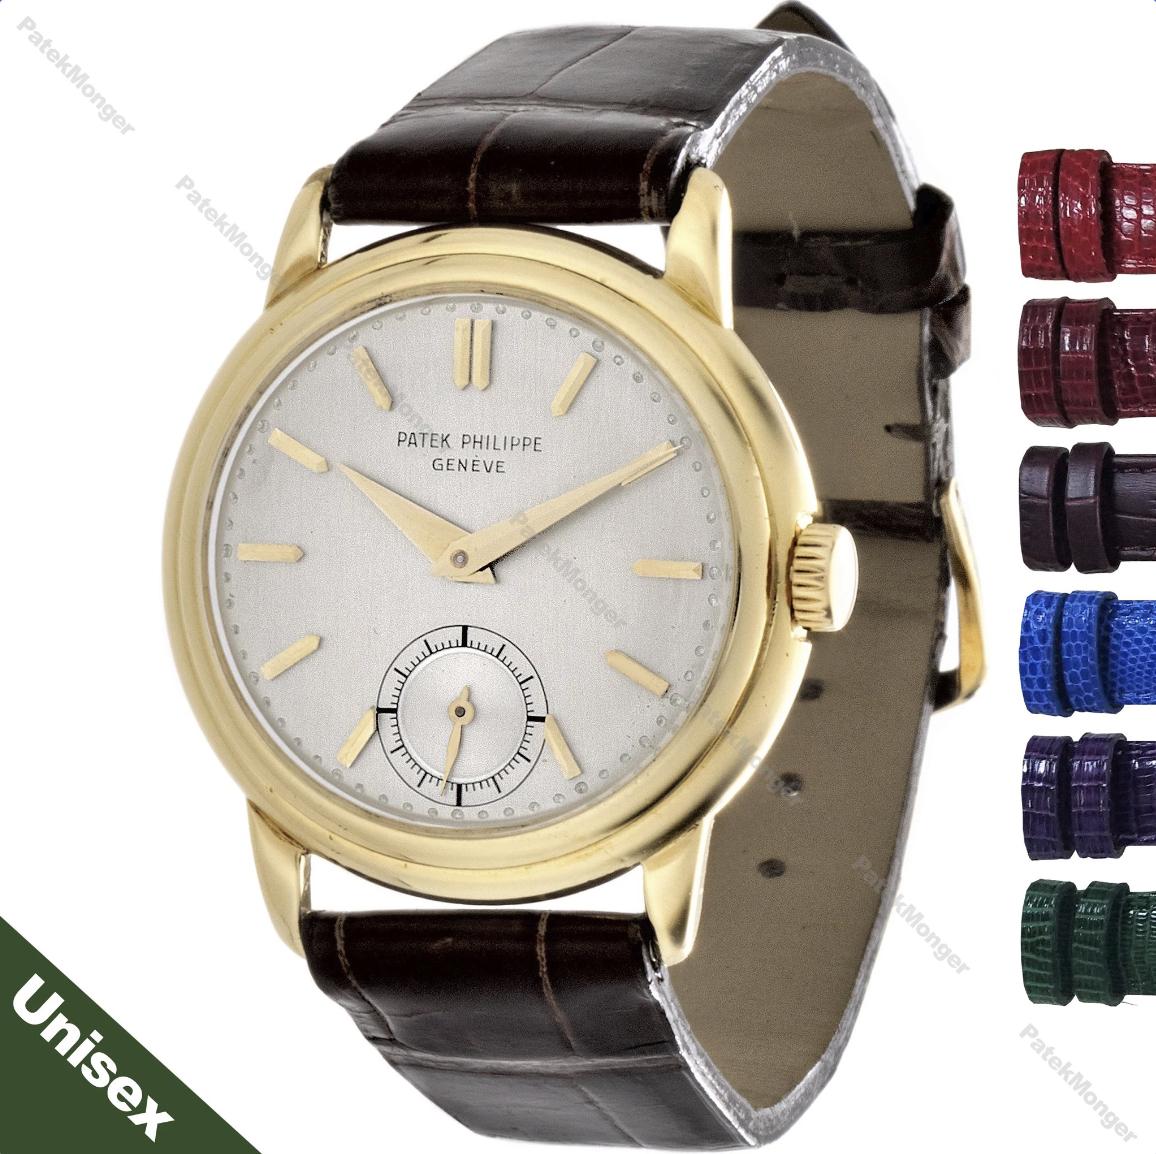 Introduction:
This Patek Philippe 592J Calatrava watch has a 33mm round double bezel case with a 12-120 P S caliber movement, #829836 and case #620810.  Multiple strap options are available.

Date & Paperwork: 
The watch was made in 1940, confirmed